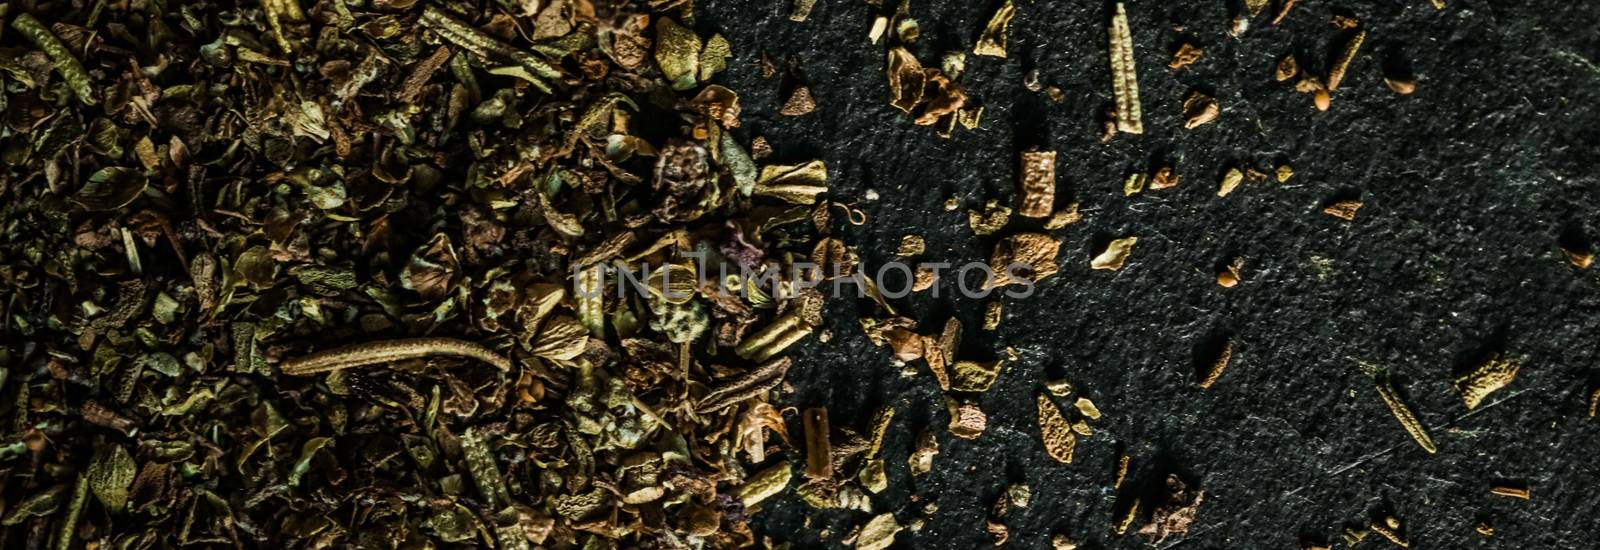 Provencal spices mix closeup on luxury stone background as flat  by Anneleven